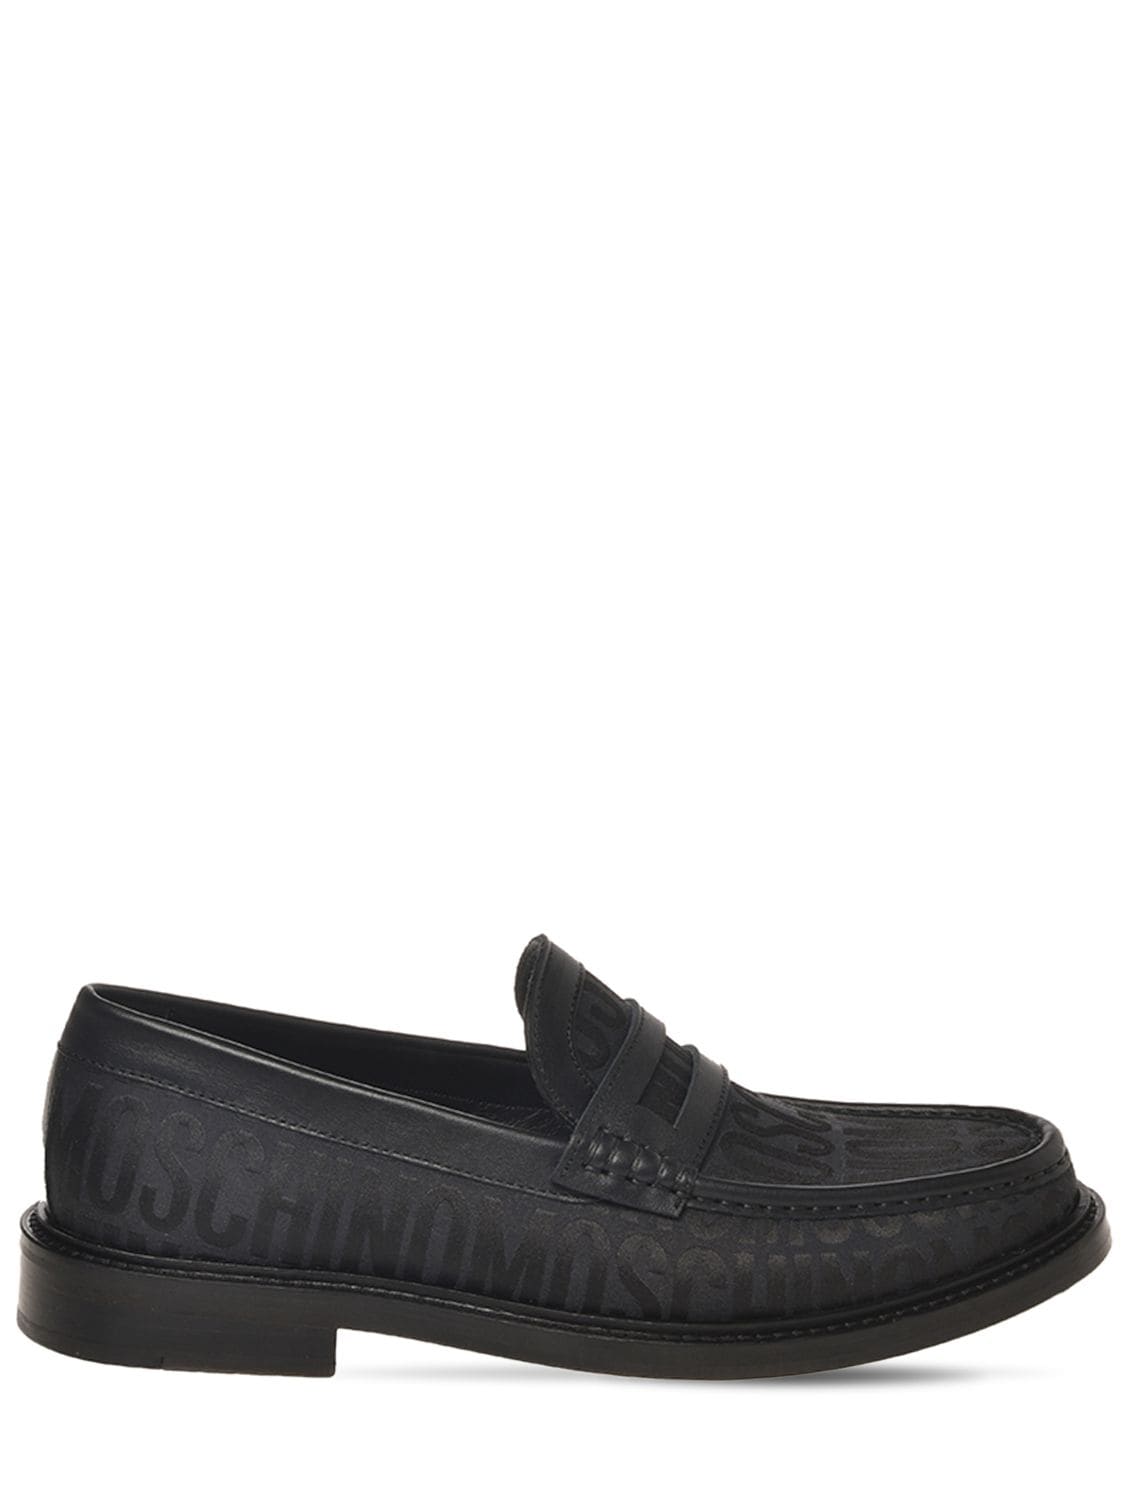 Moschino Logo Jacquard Loafers In Black